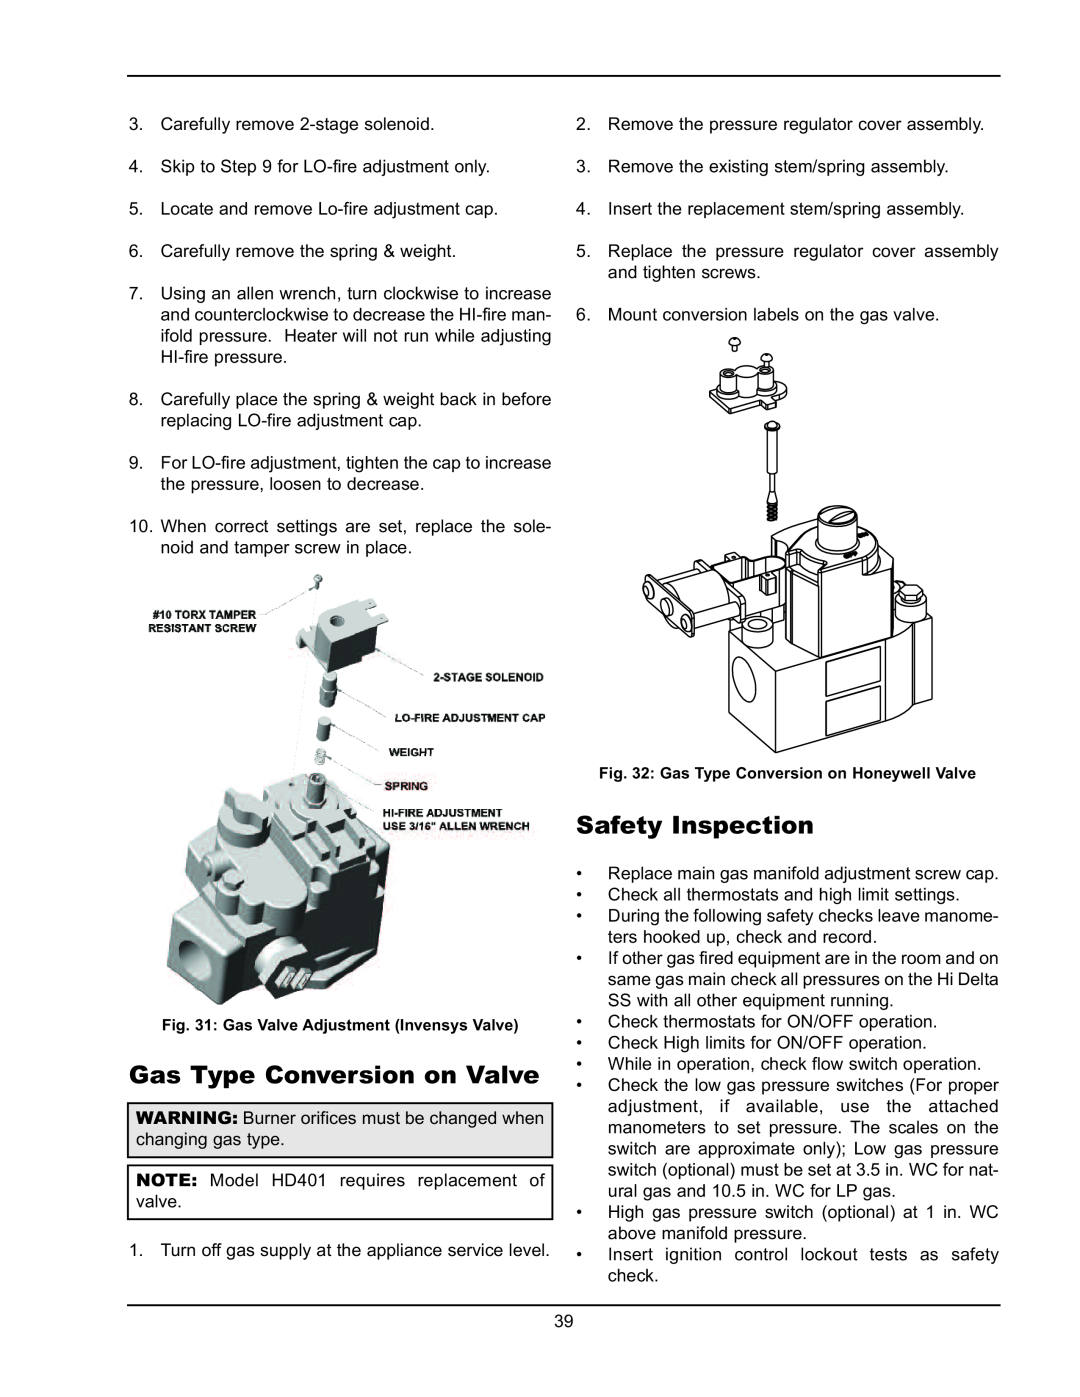 Raypak HD101, HD401 operating instructions Gas Type Conversion on Valve, Safety Inspection 